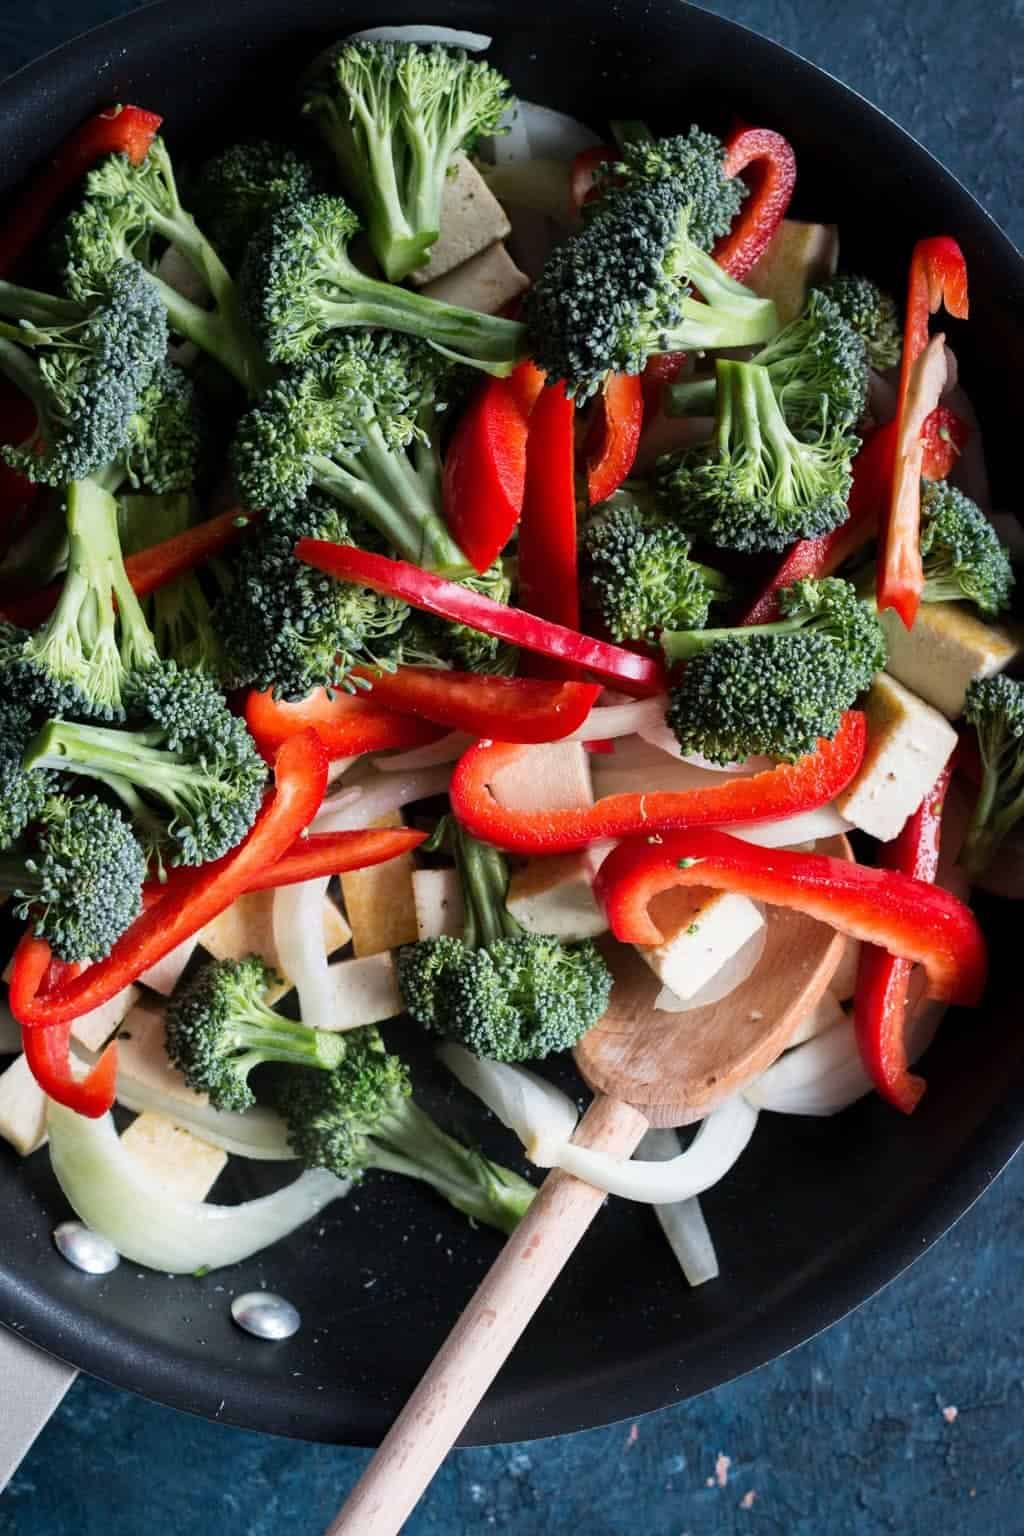 onions, peppers, broccoli and tofu in a skillet